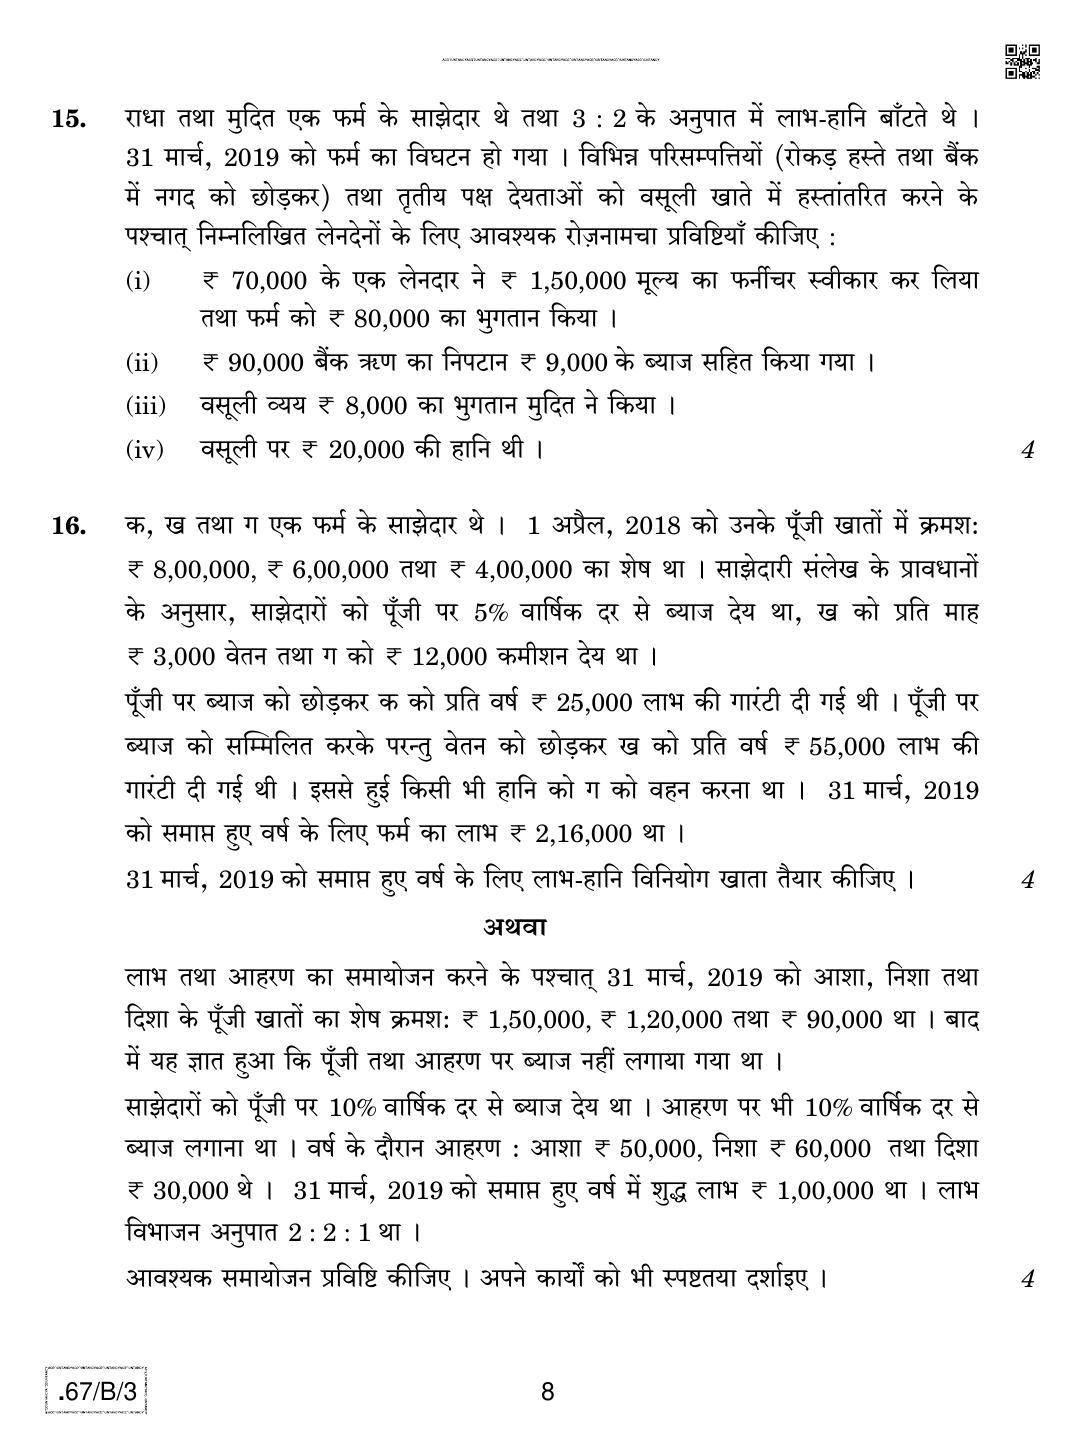 CBSE Class 12 67-C-3 - Accountancy 2020 Compartment Question Paper - Page 8